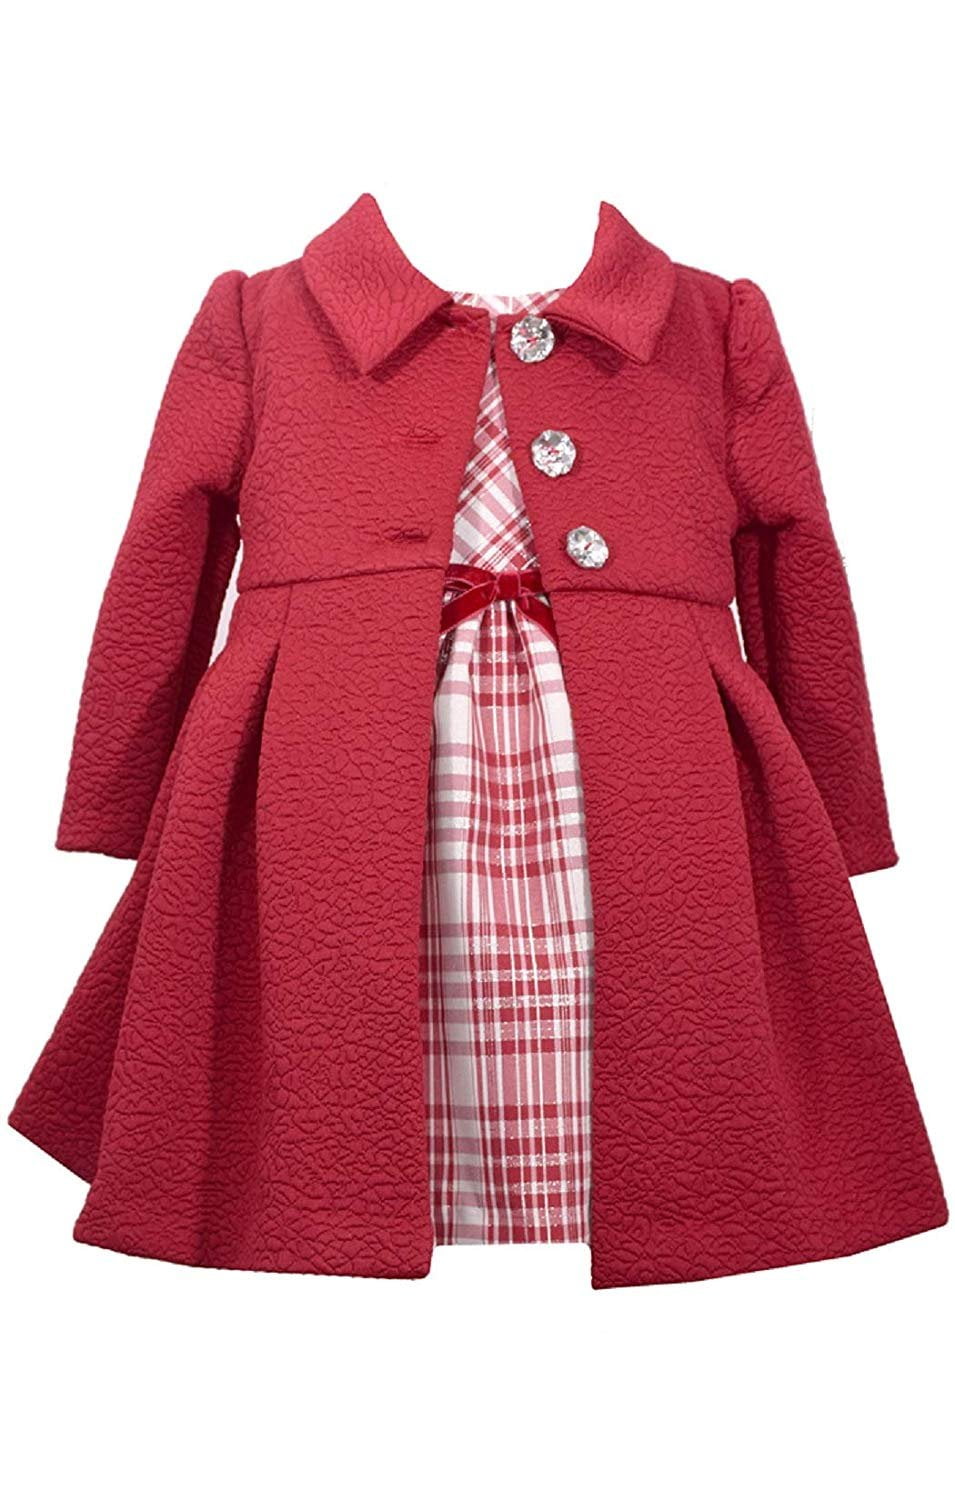 Bonnie Jean Baby-Girls Houndstooth Coat and Dress Set (4T, Burgundy ...